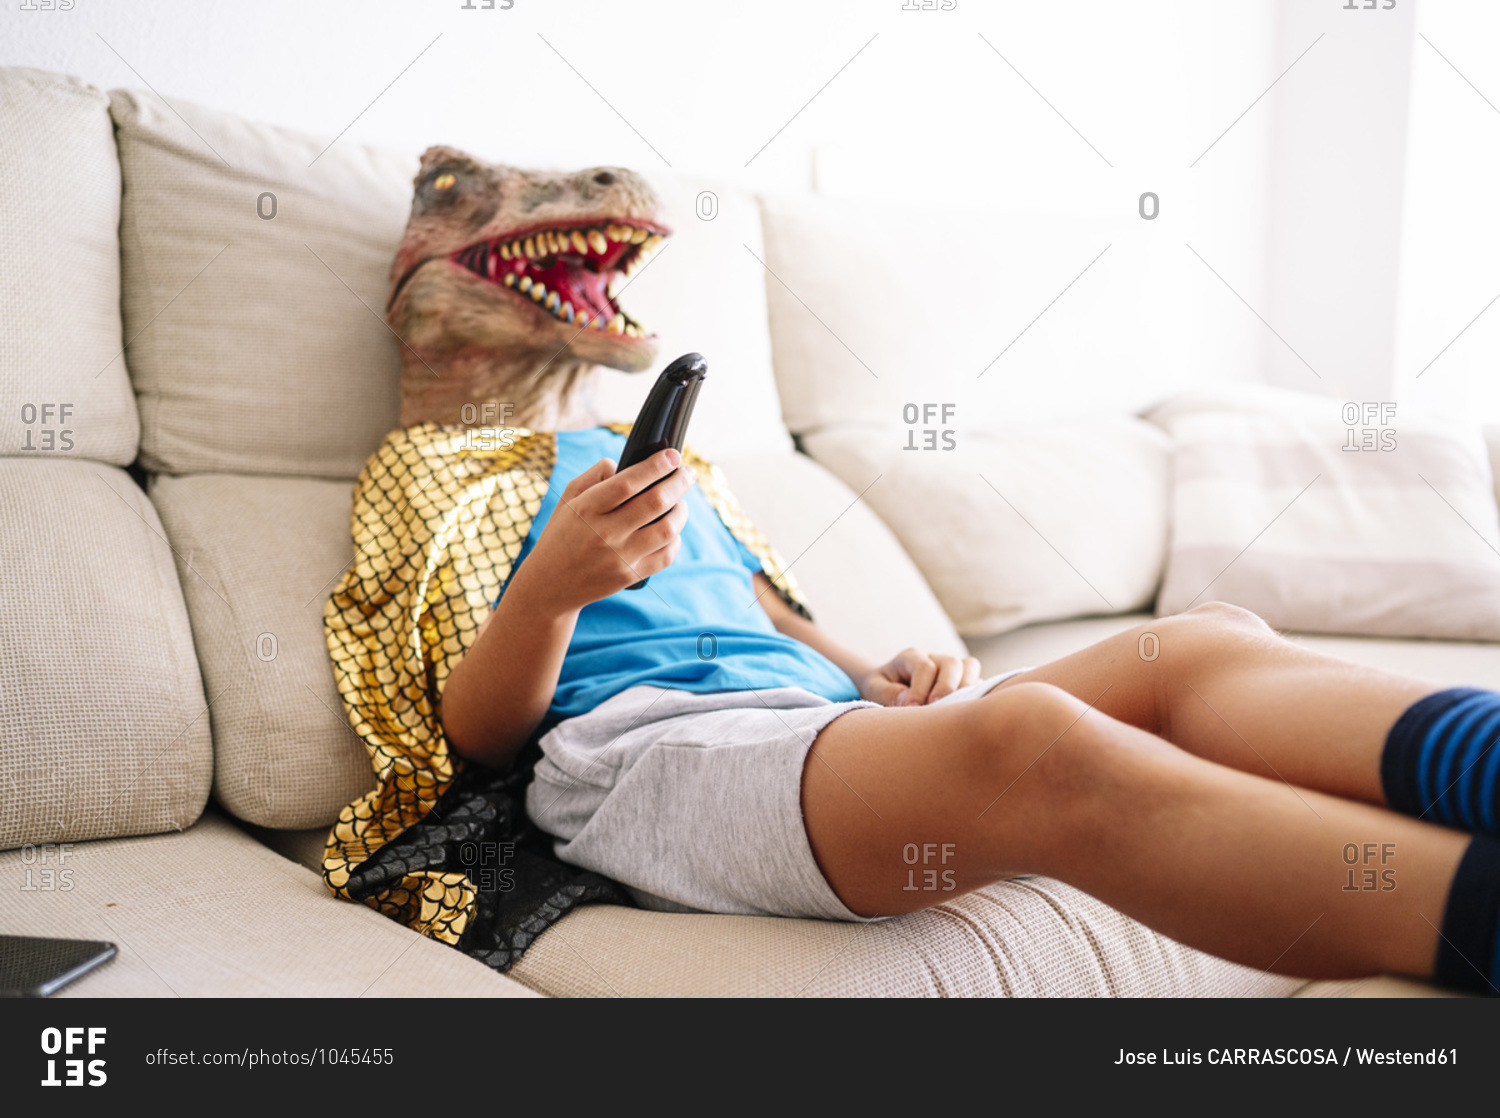 Boy wearing dinosaur mask watching TV while relaxing on sofa at home